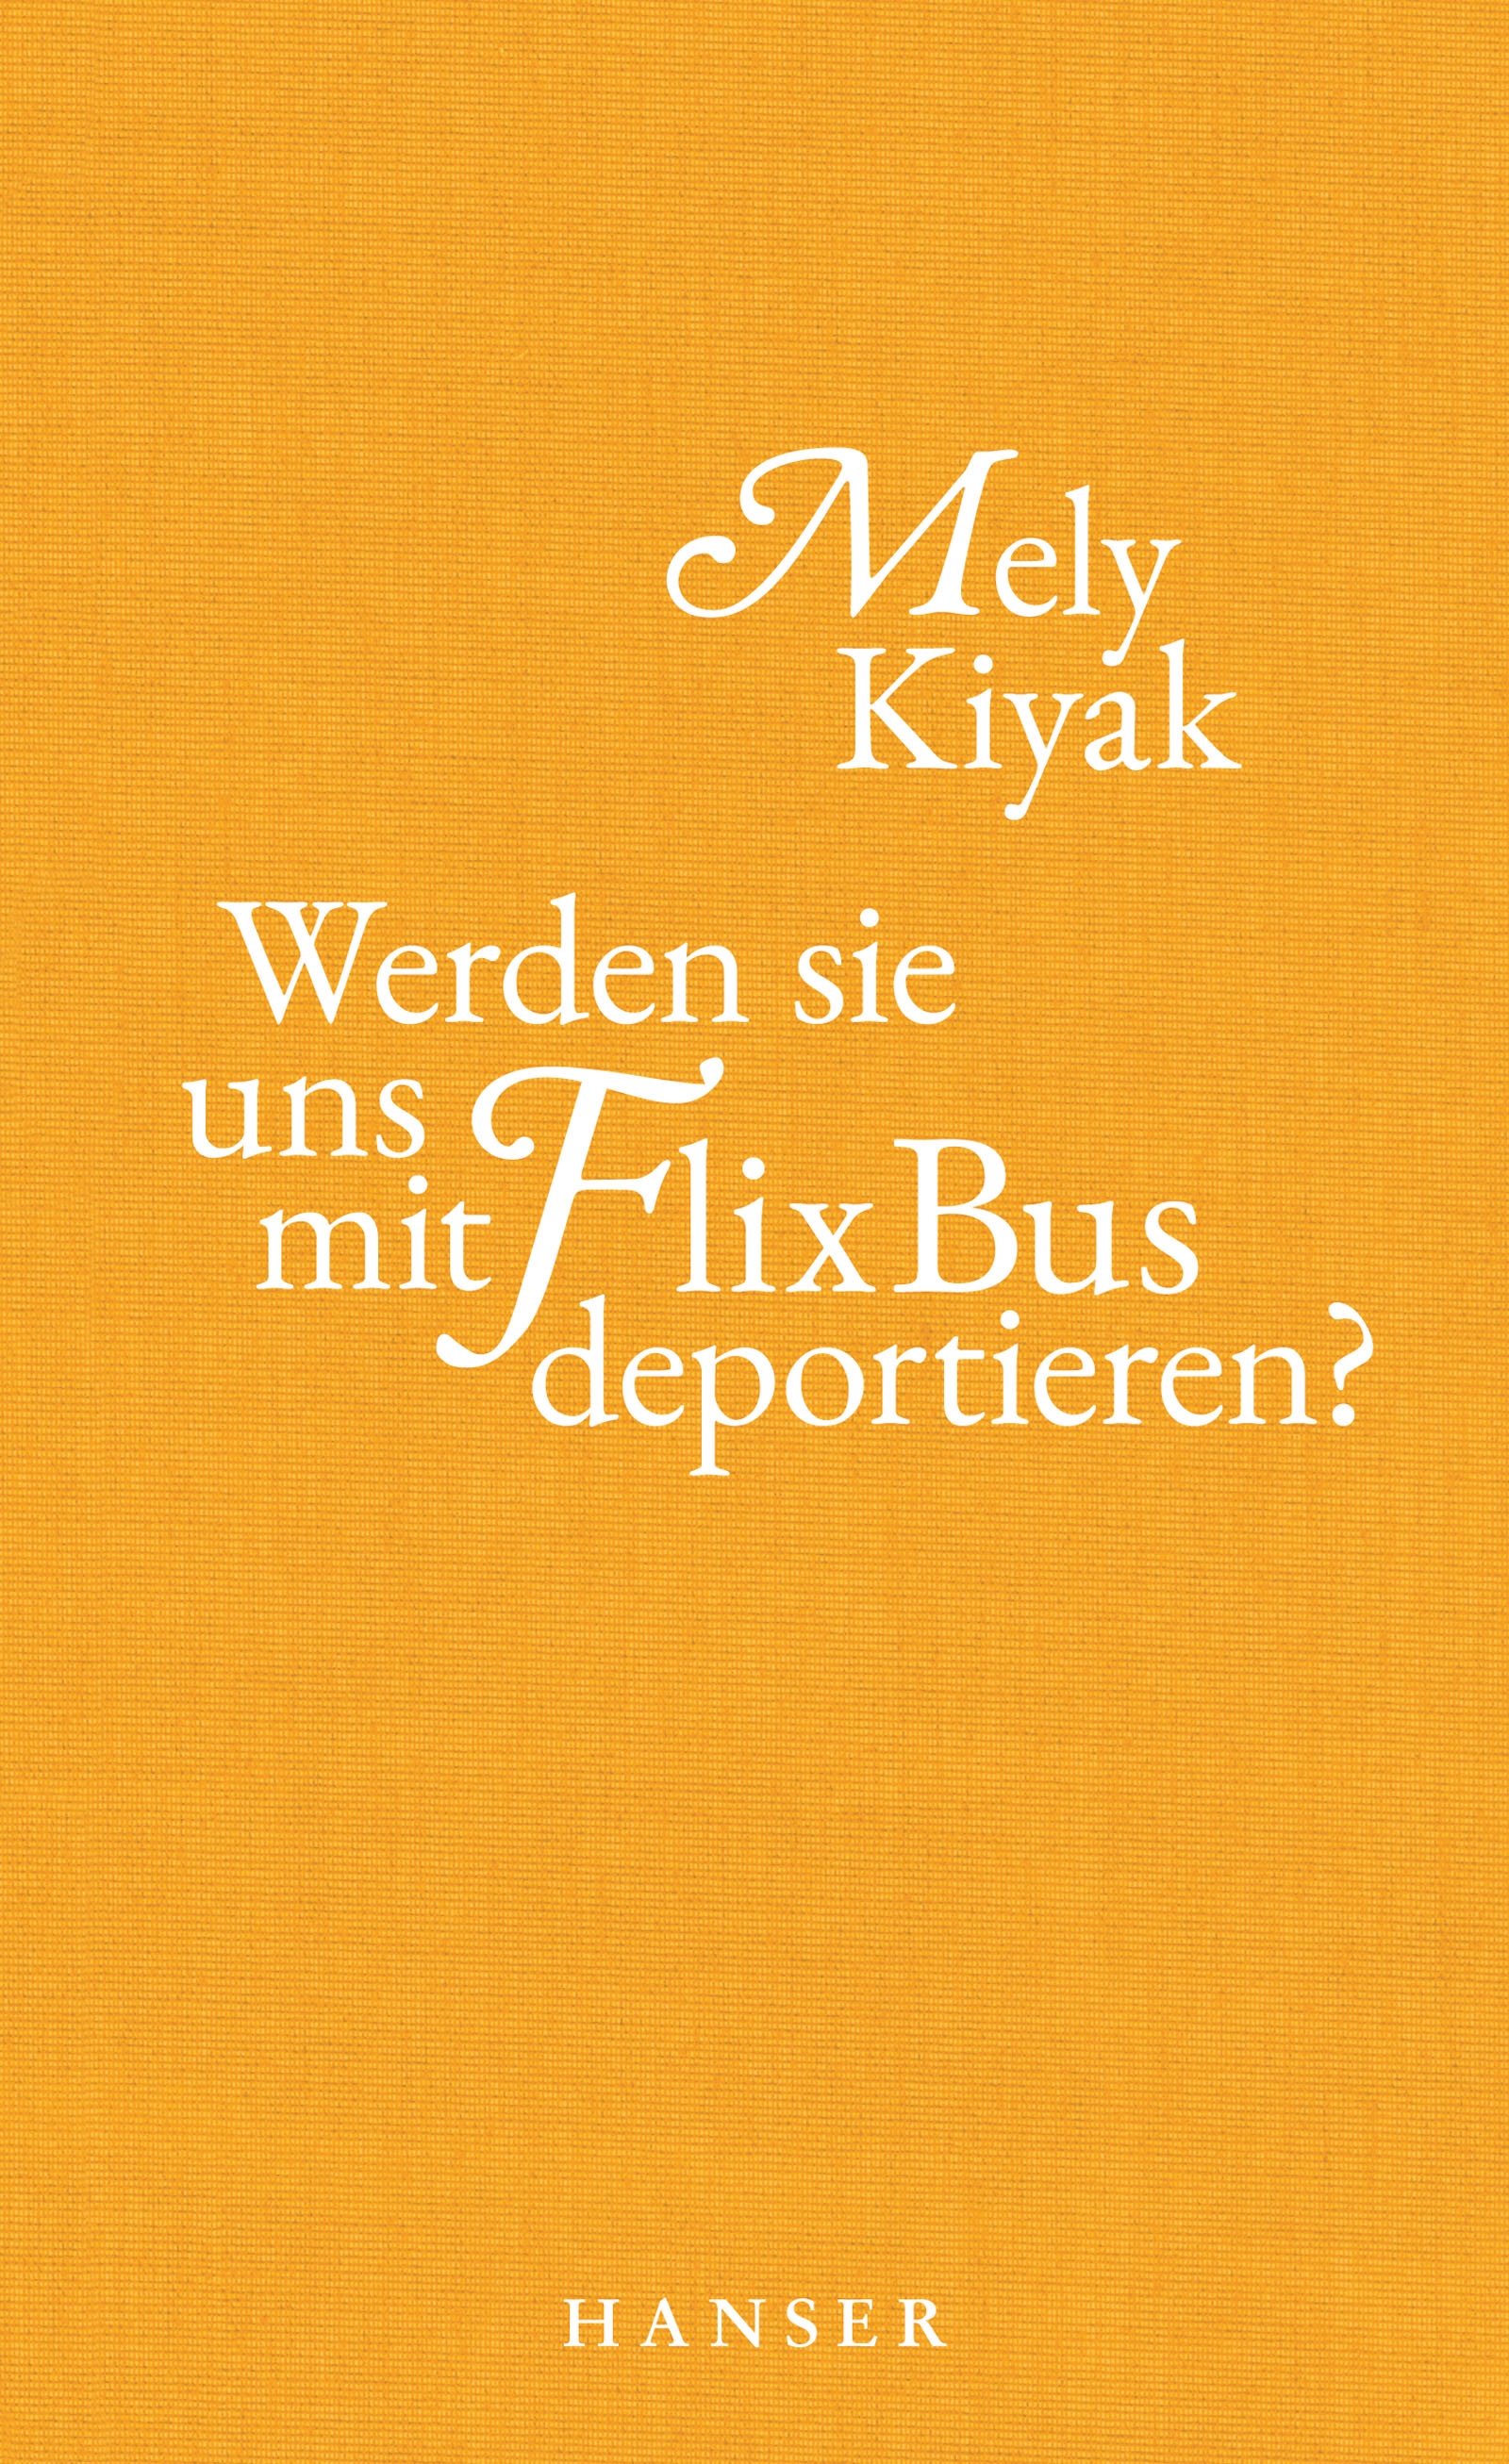 Are They Going to Deport Us on a Flixbus?